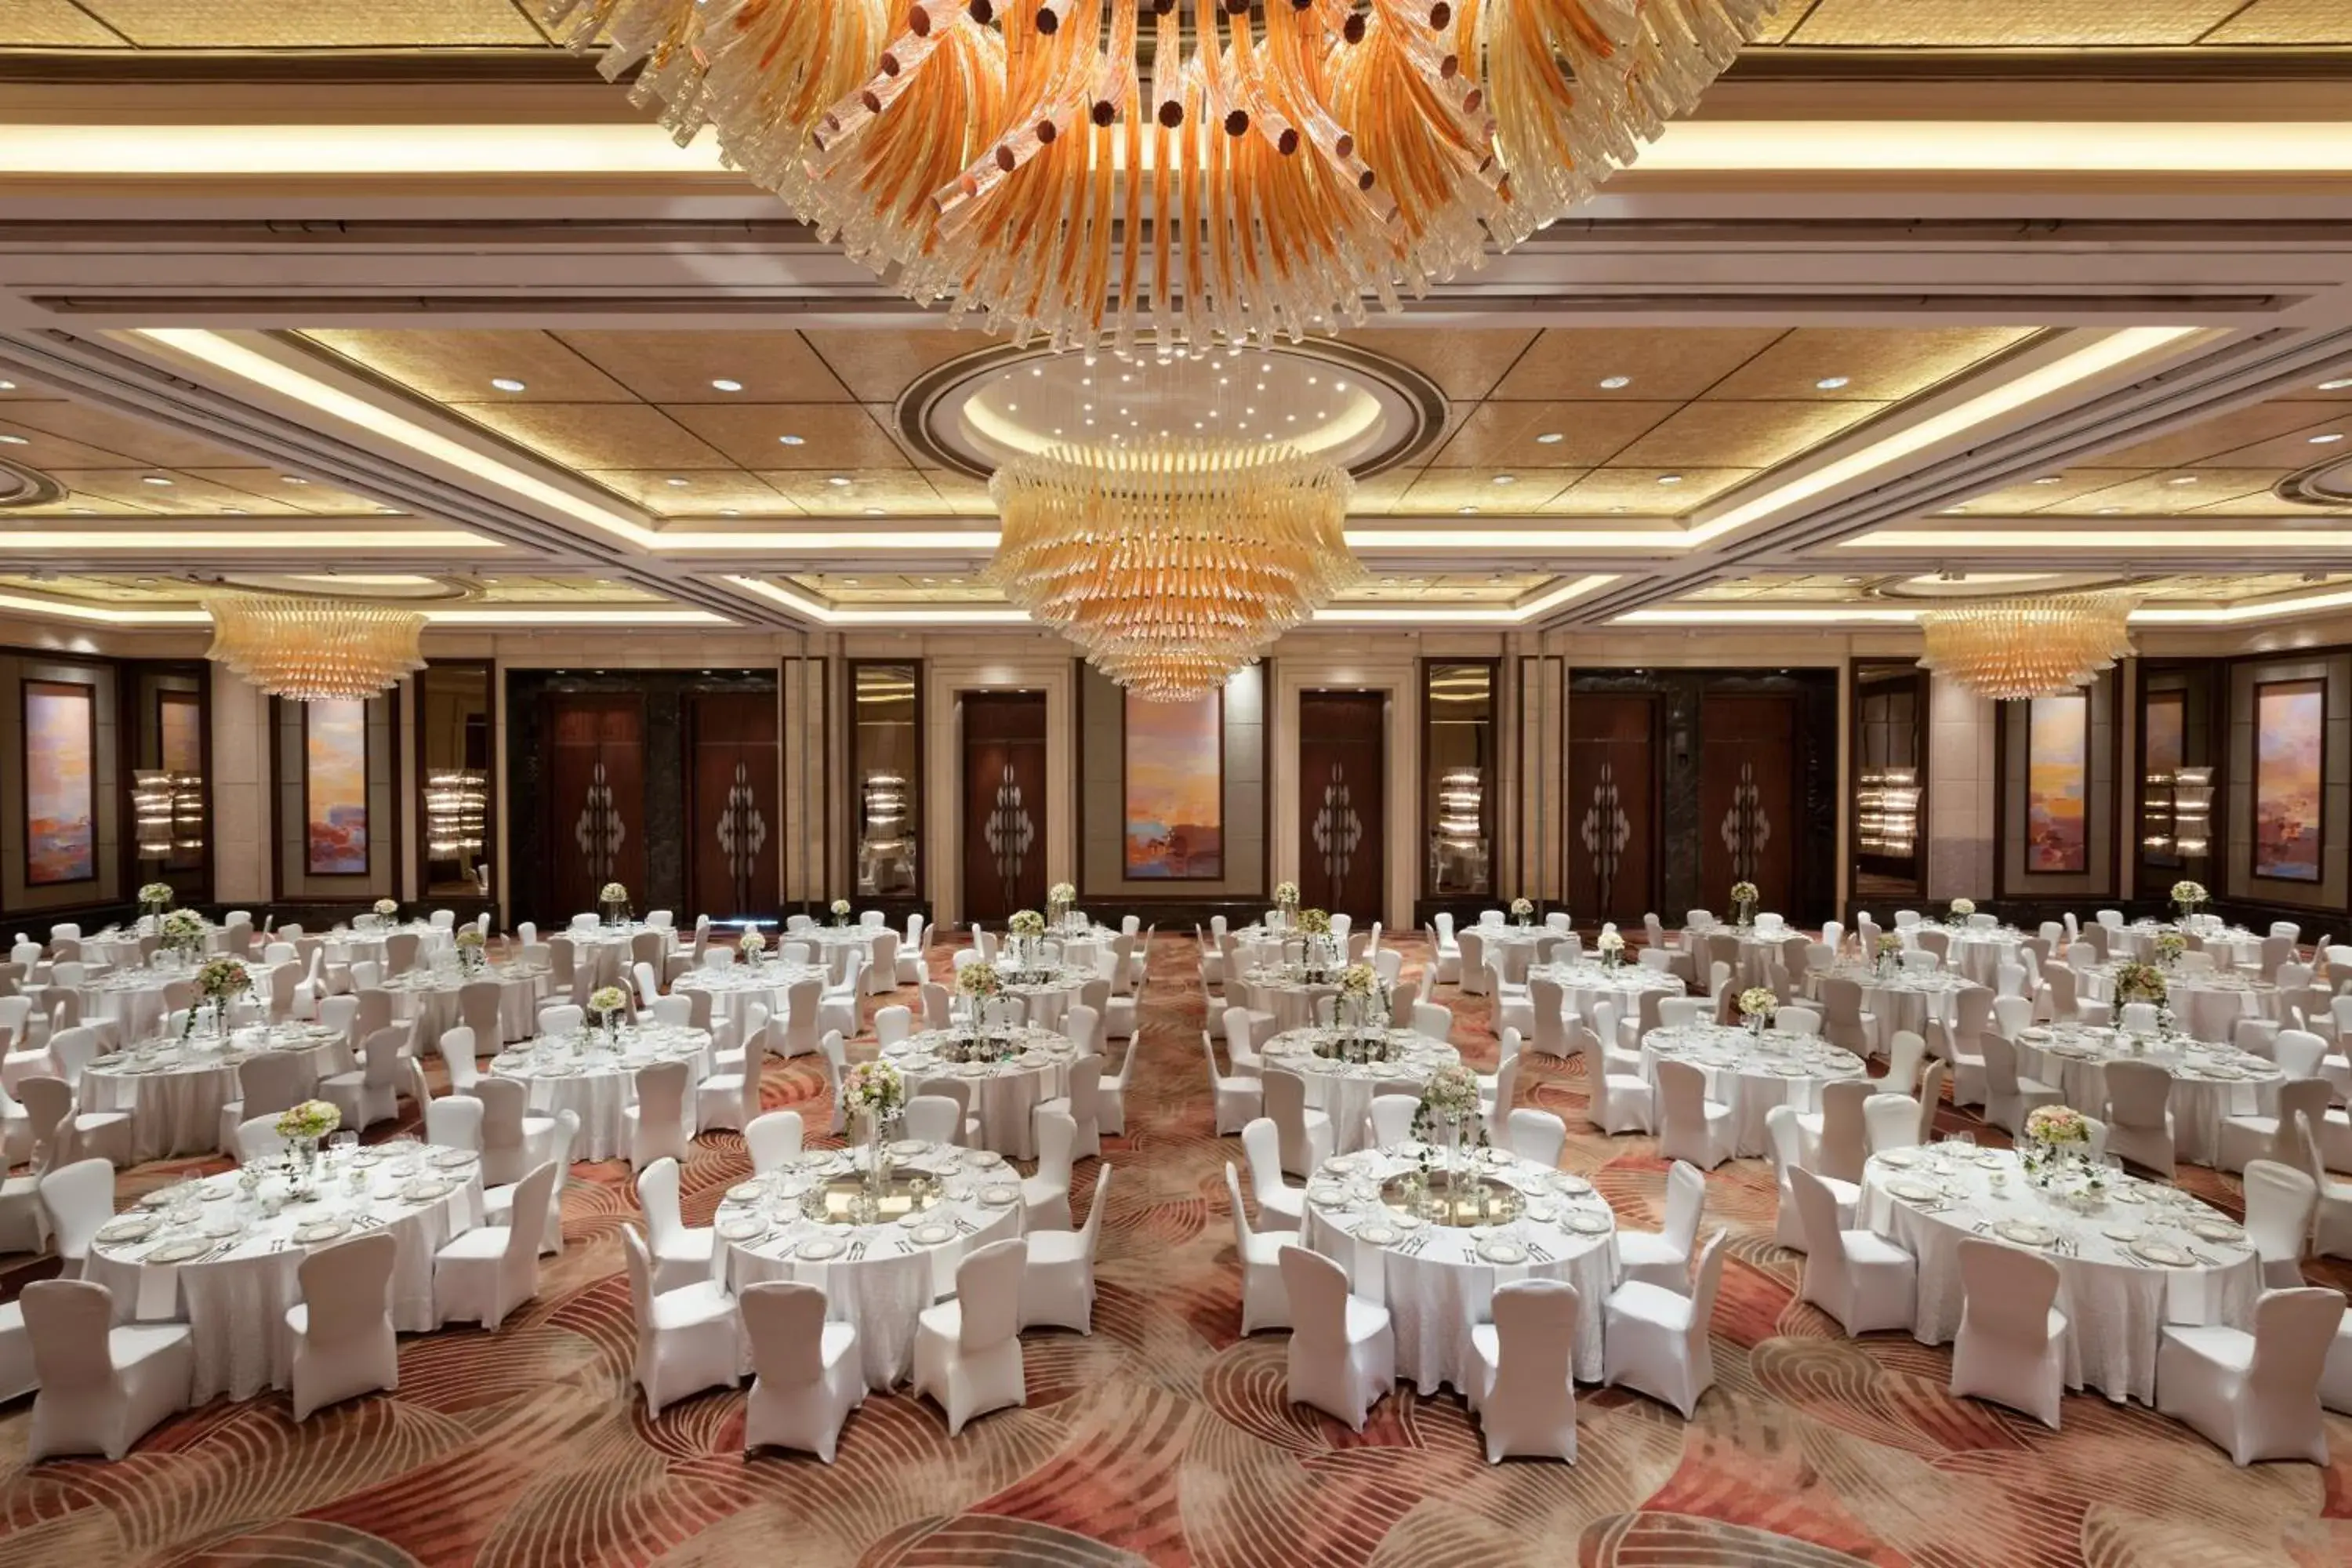 Banquet/Function facilities, Banquet Facilities in Kerry Hotel Pudong, Shanghai